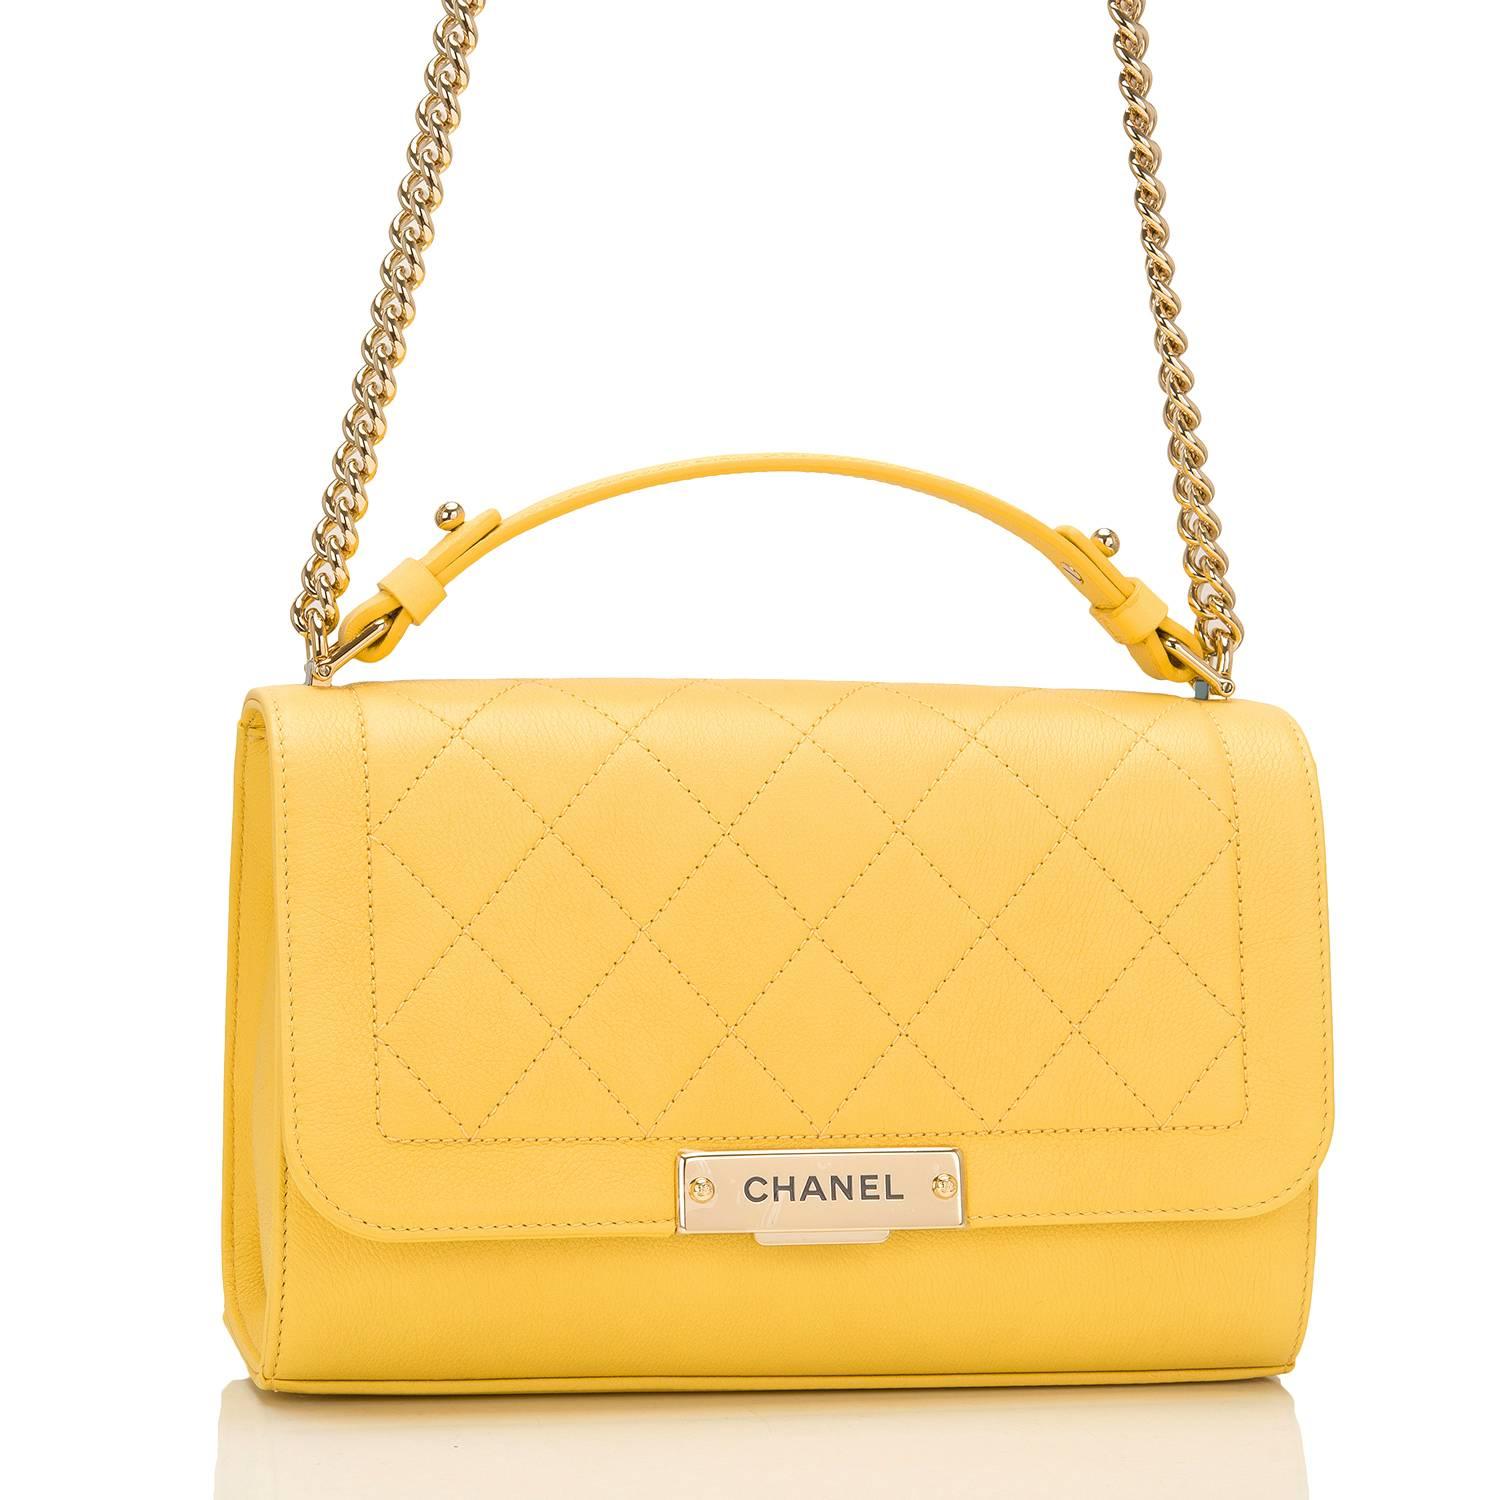 Chanel Medium Label Click Flap bag of quilted and smooth yellow grained calfskin leather and gold tone hardware.

This limited edition Chanel bag, from the 2017 cruise collection, features a front flap with push-lock closure, Chanel gold tone